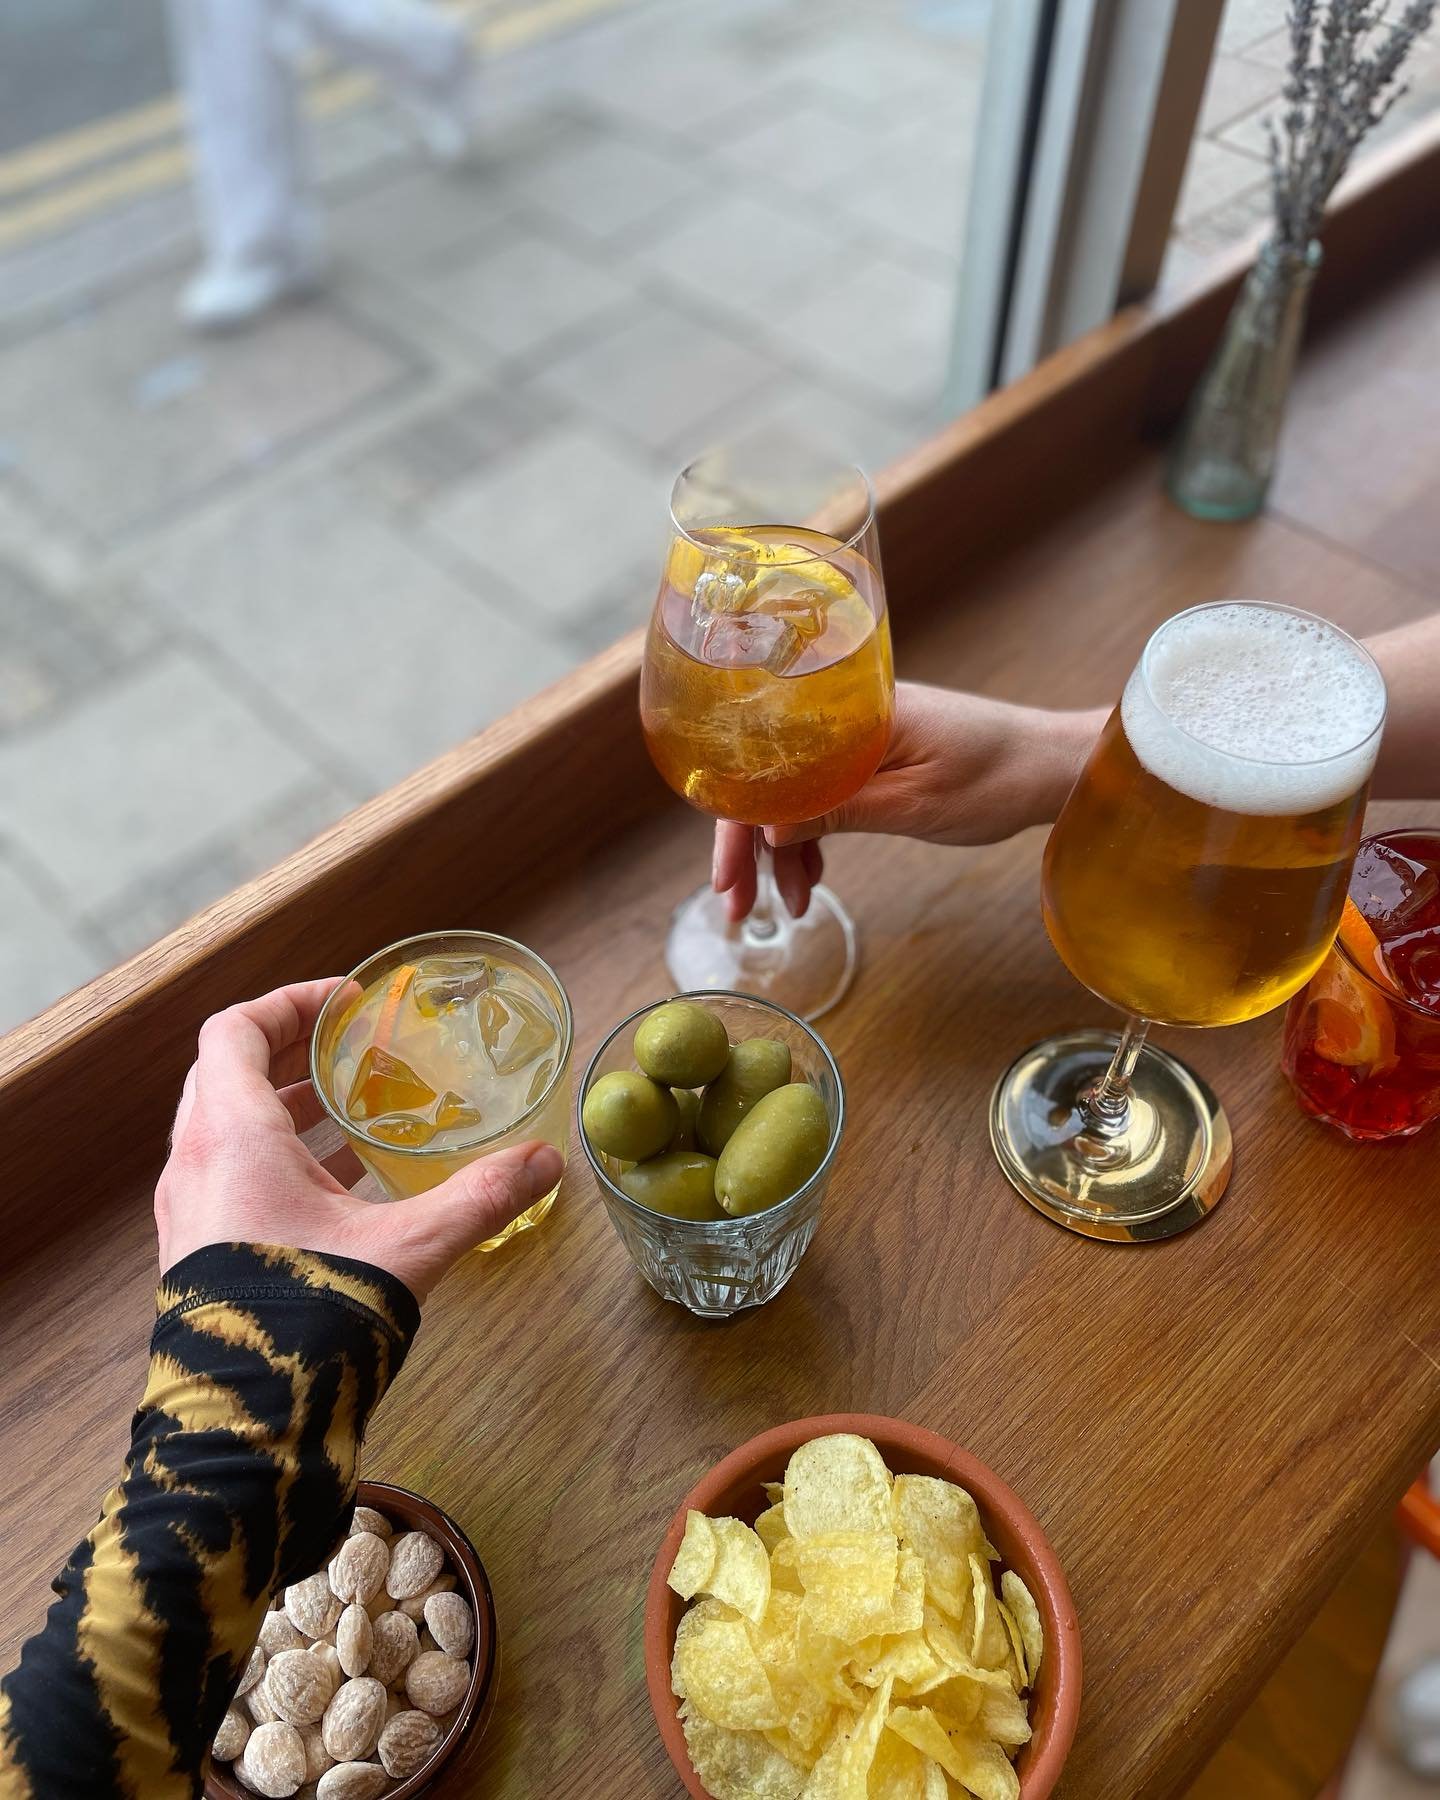 🍸🍻APERITIVO TIME 🍷🍹 
The days are getting longer and sunnier, perfect for some leisurely afternoon drinking so until the end of May, we&rsquo;ll be running a new Aperitivo offer!
 
Join us before 7pm weds-sat, or until 4pm Sunday, and you can enj